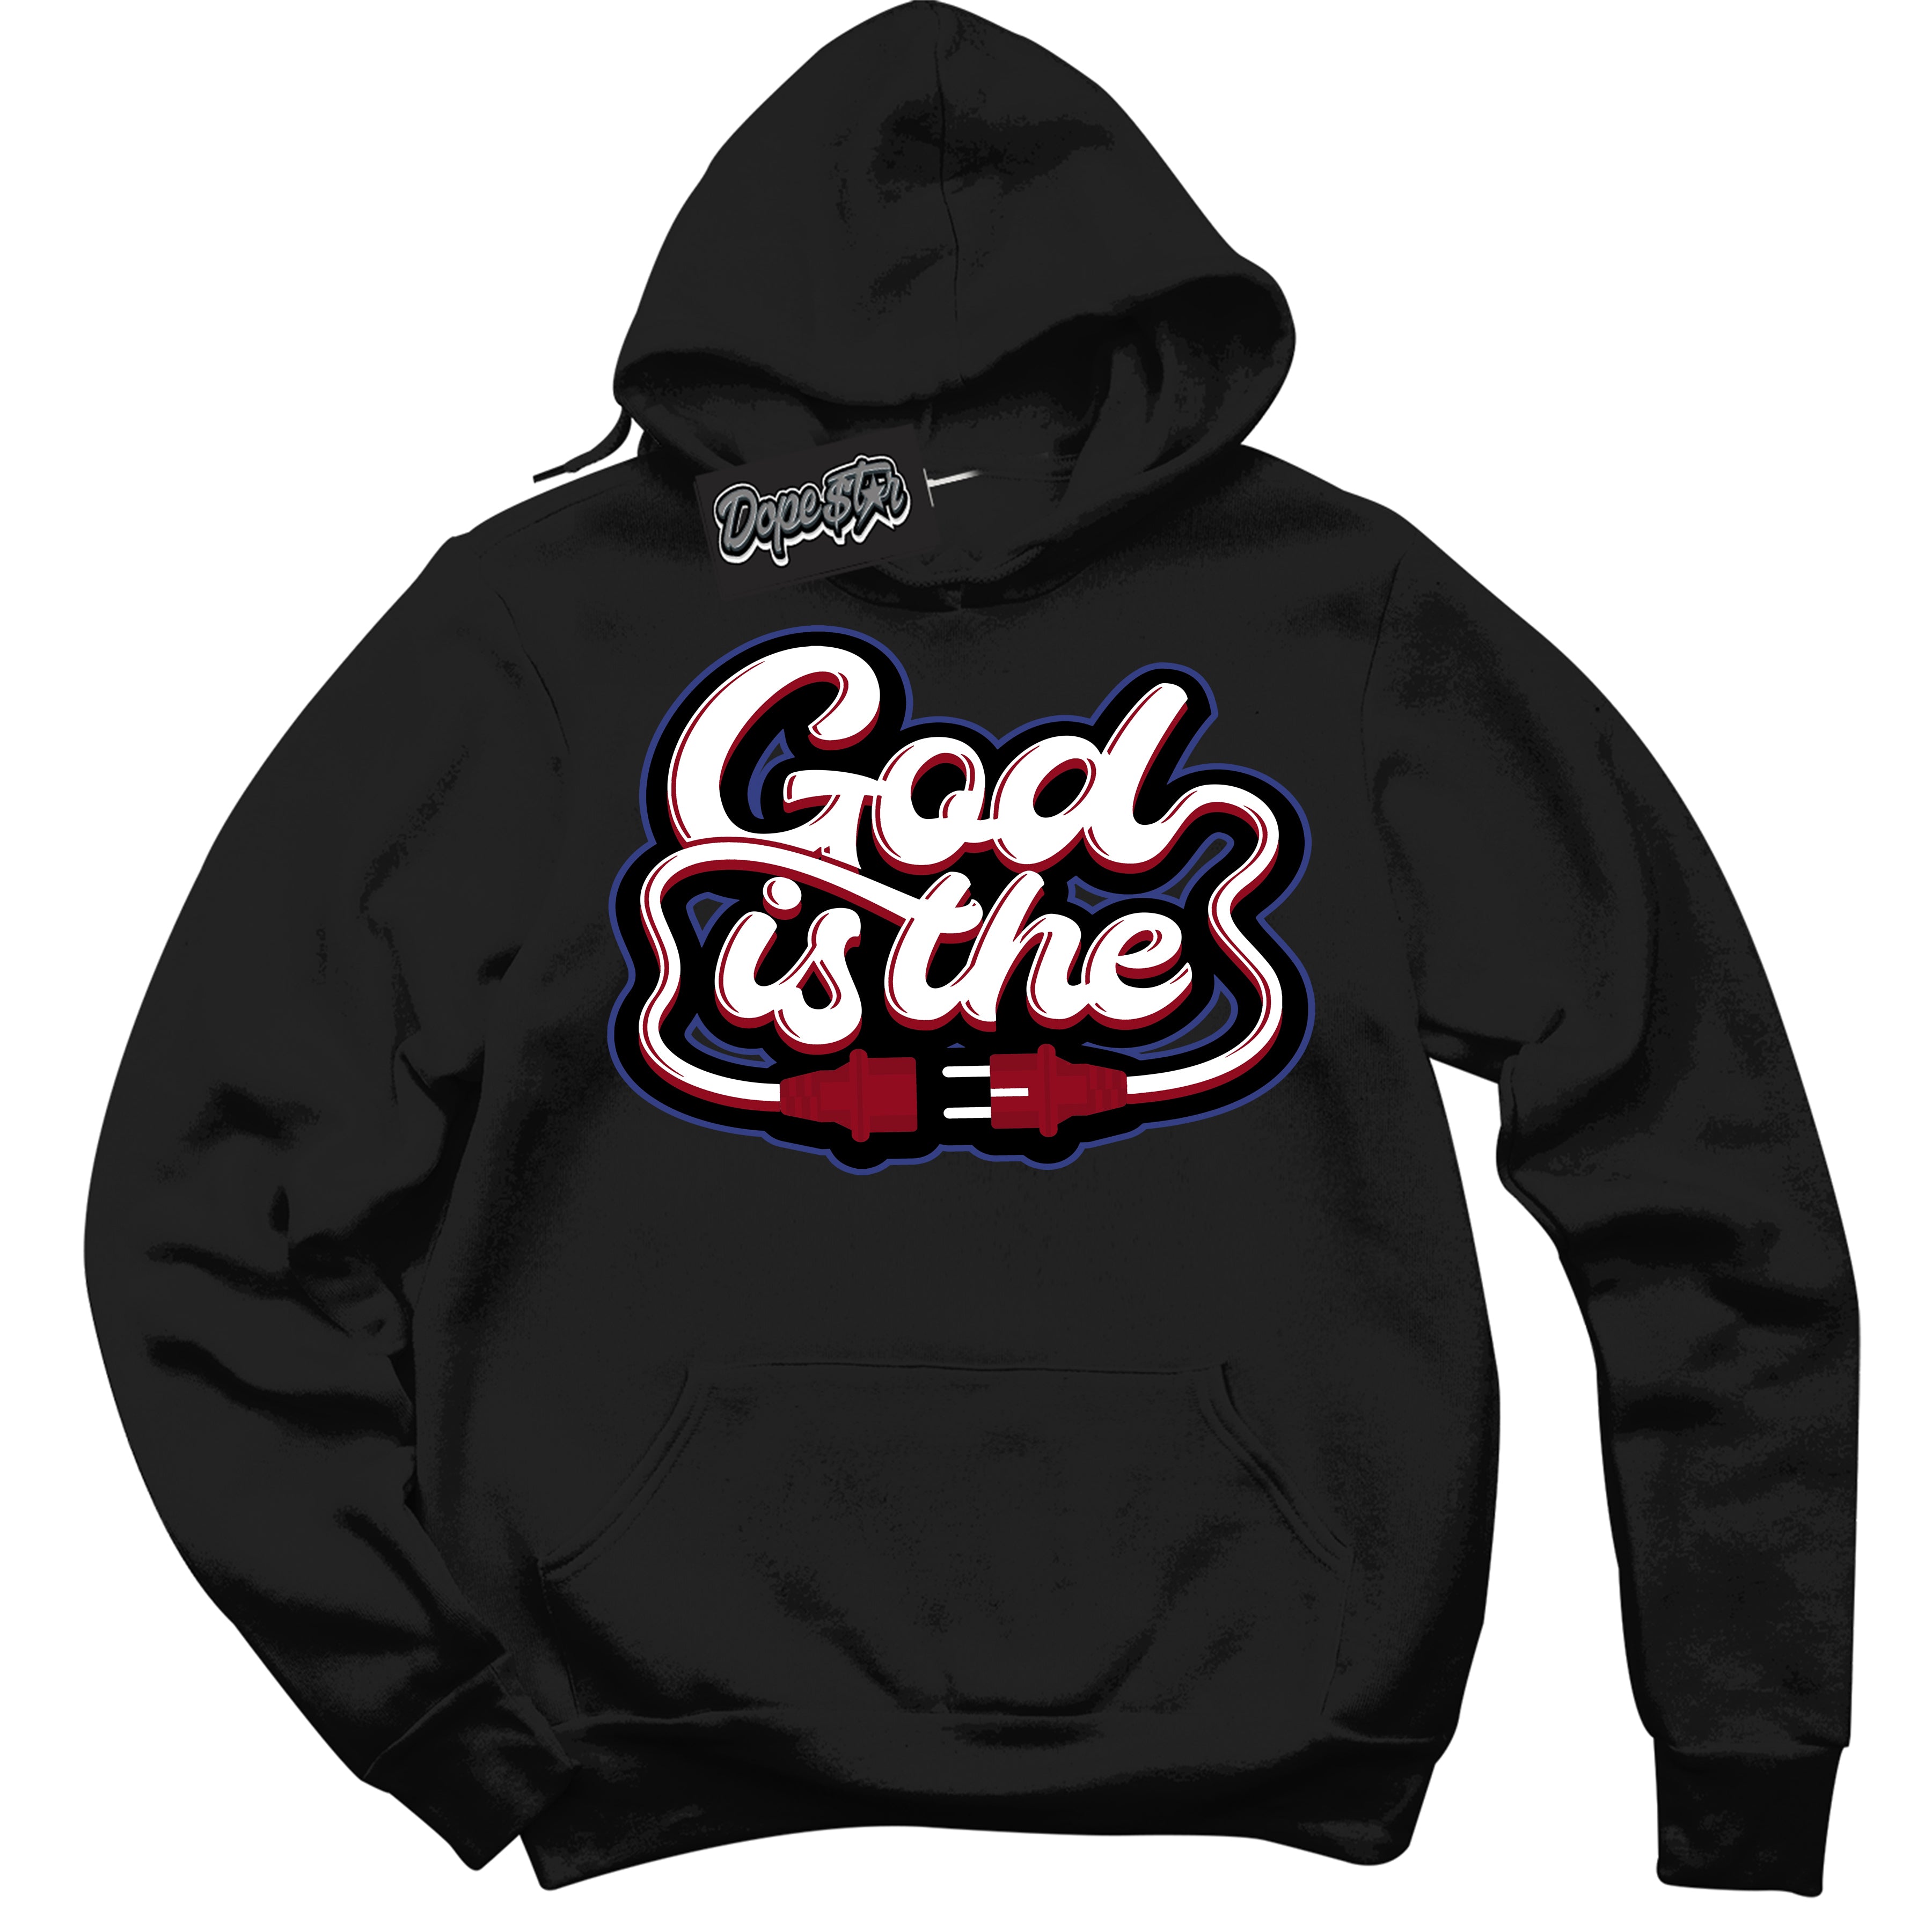 Cool Black Hoodie with “ God Is The ”  design that Perfectly Matches Playoffs 8s Sneakers.